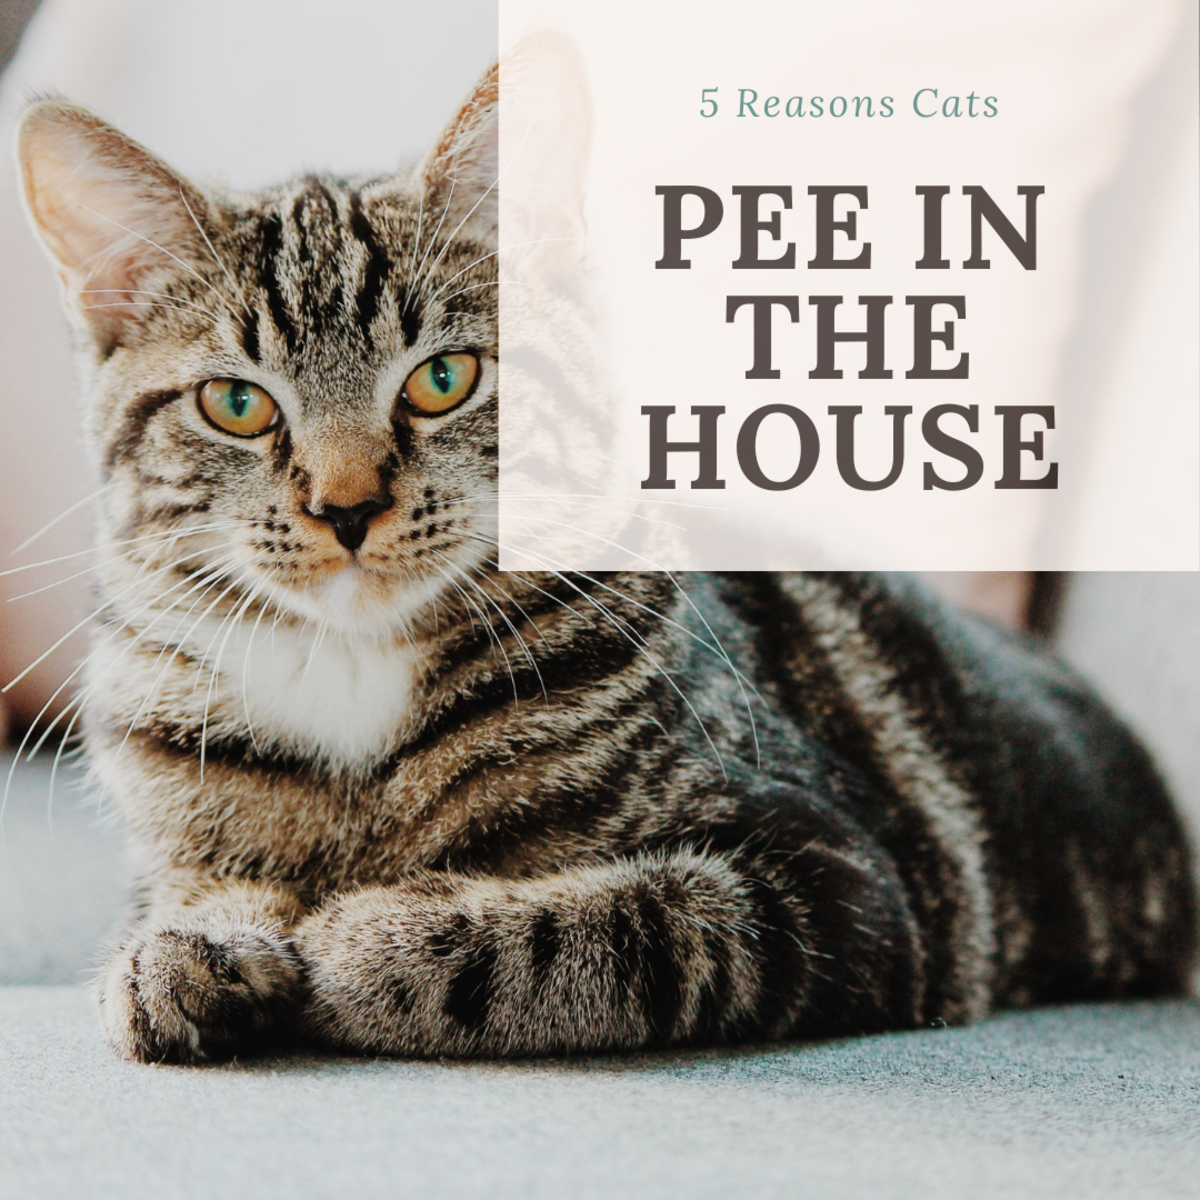 There are many reasons why a cat might stop using the litter box.